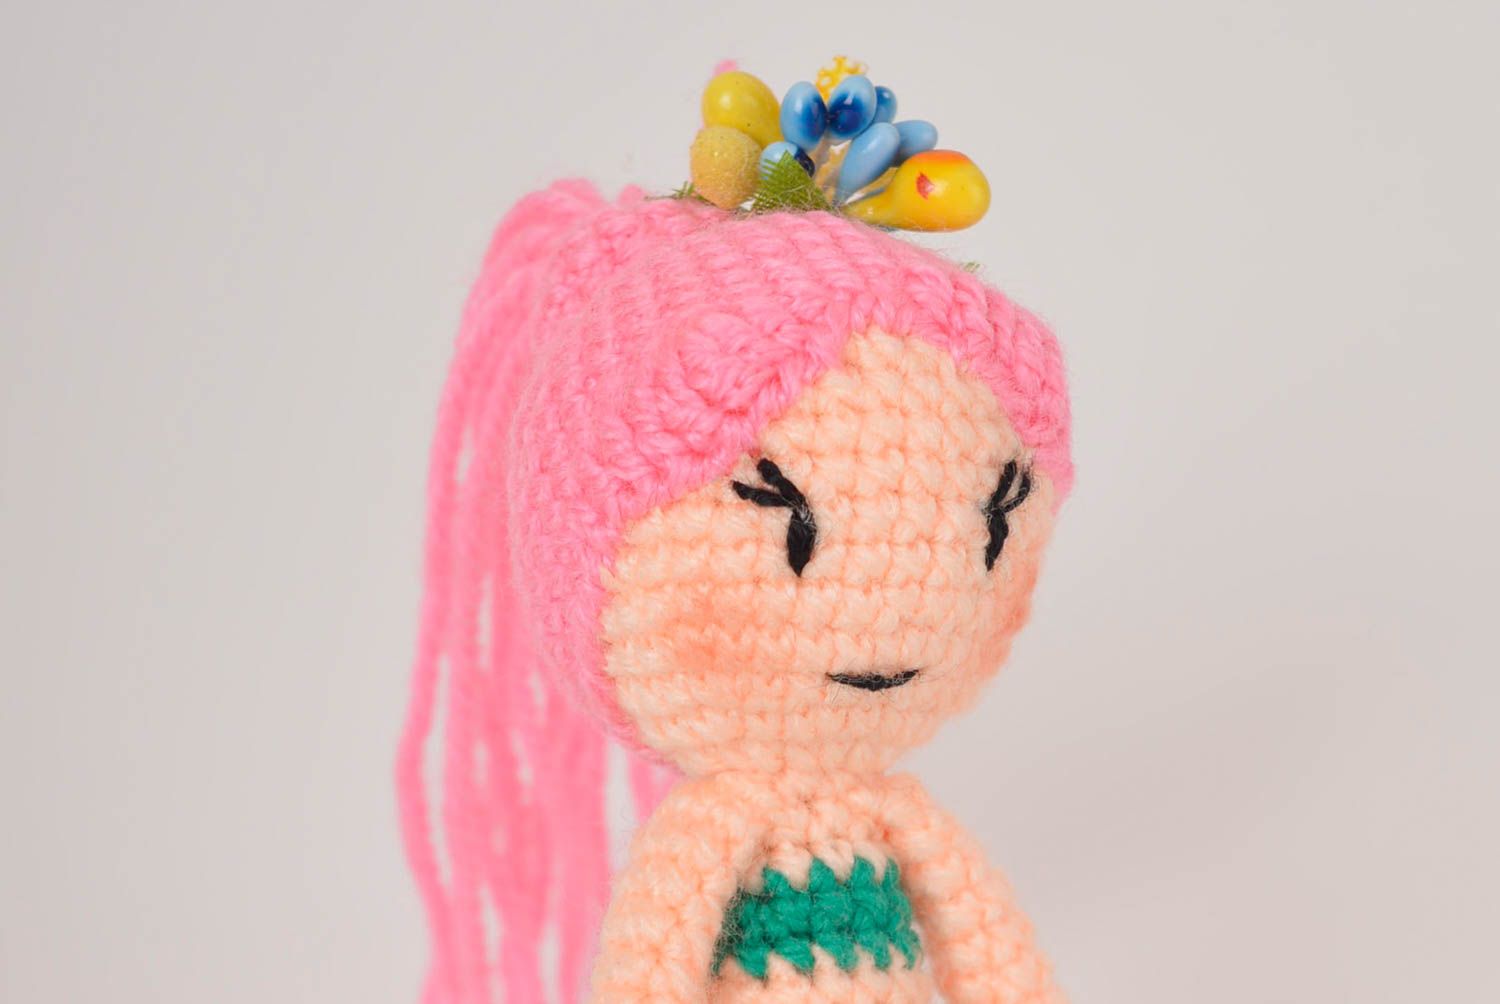 Little mermaid stuffed knitted toy in pink and green colors. 7 inches tall photo 5